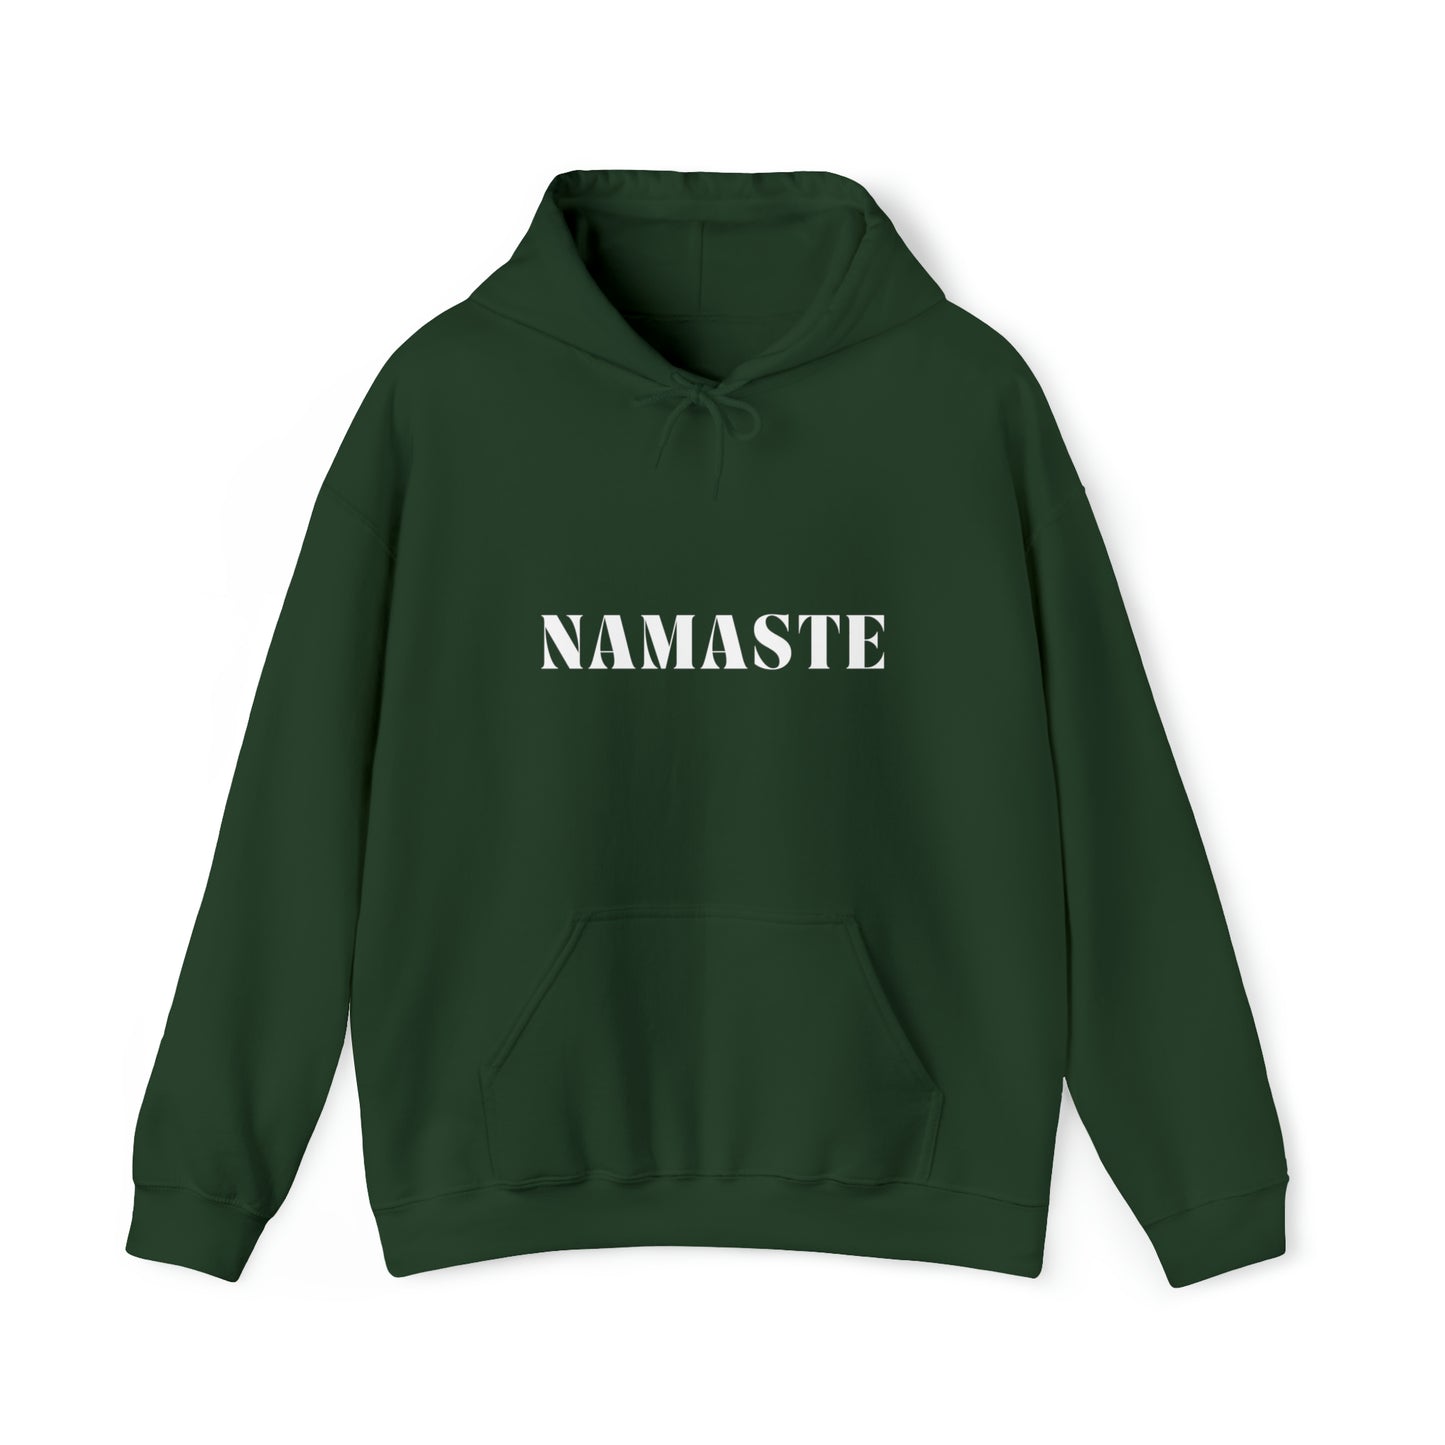 S Forest Green Namaste Hoodie from HoodySZN.com